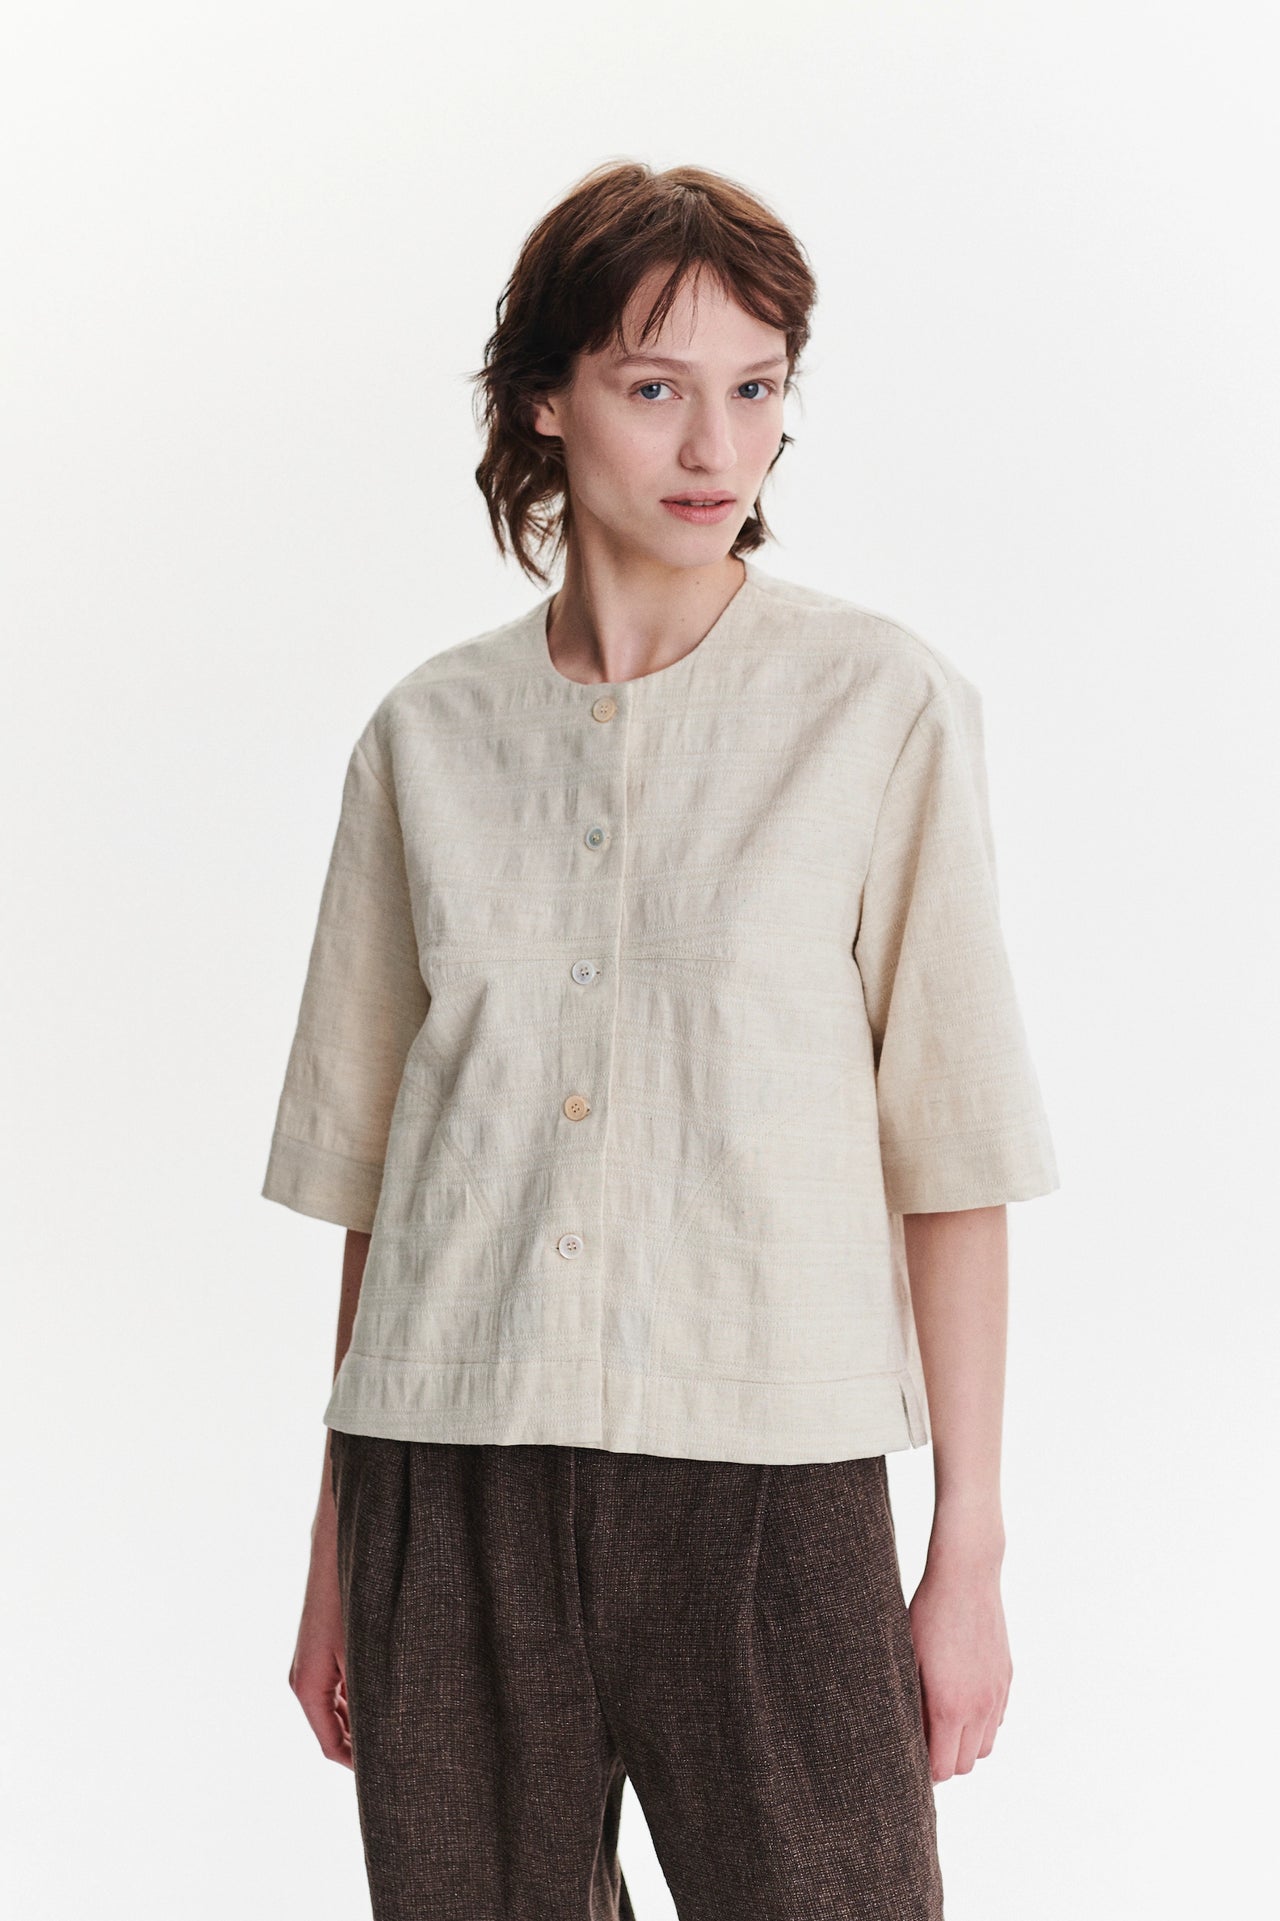 Collarless Jacket Shirt in a Grey Beige Structural Japanese Cotton and Linen